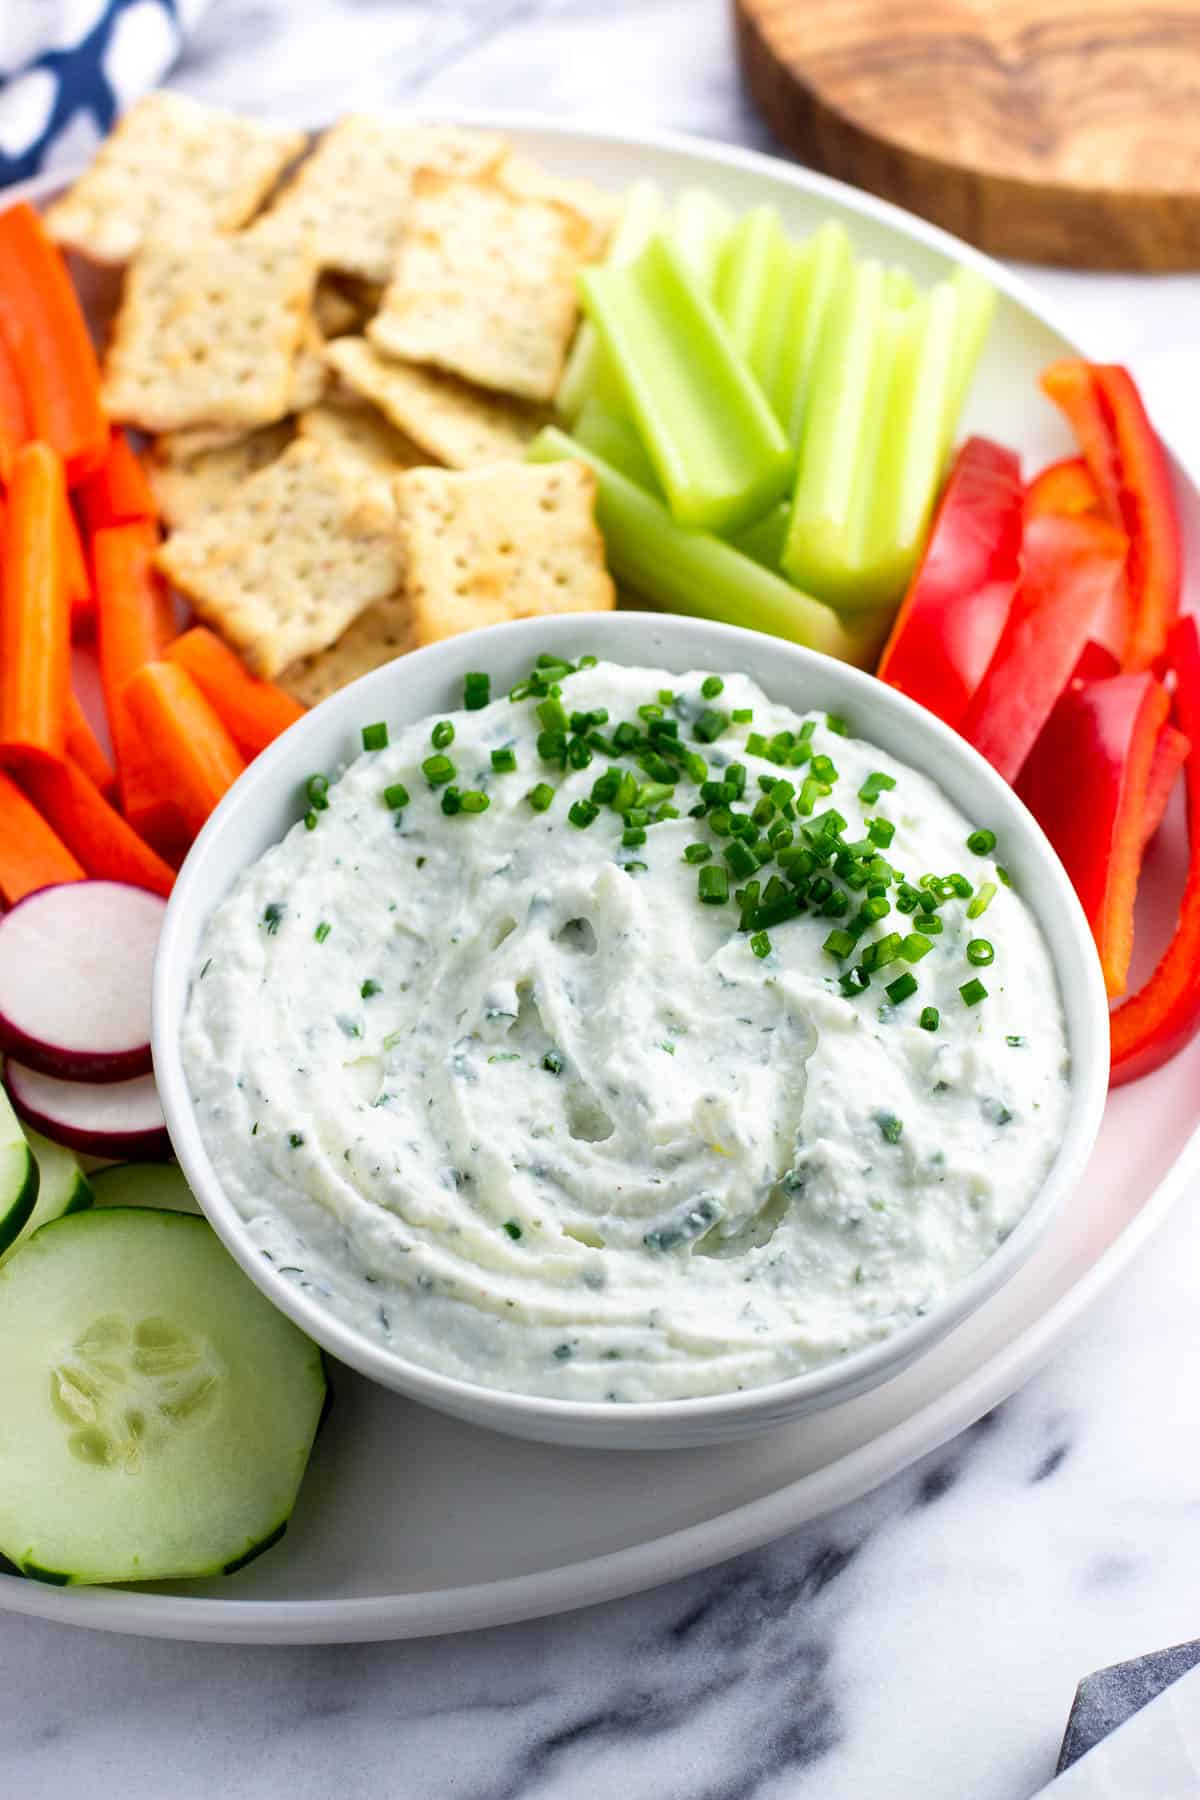 Creamy herbed cottage cheese dip on a platter with vegetables and crackers.